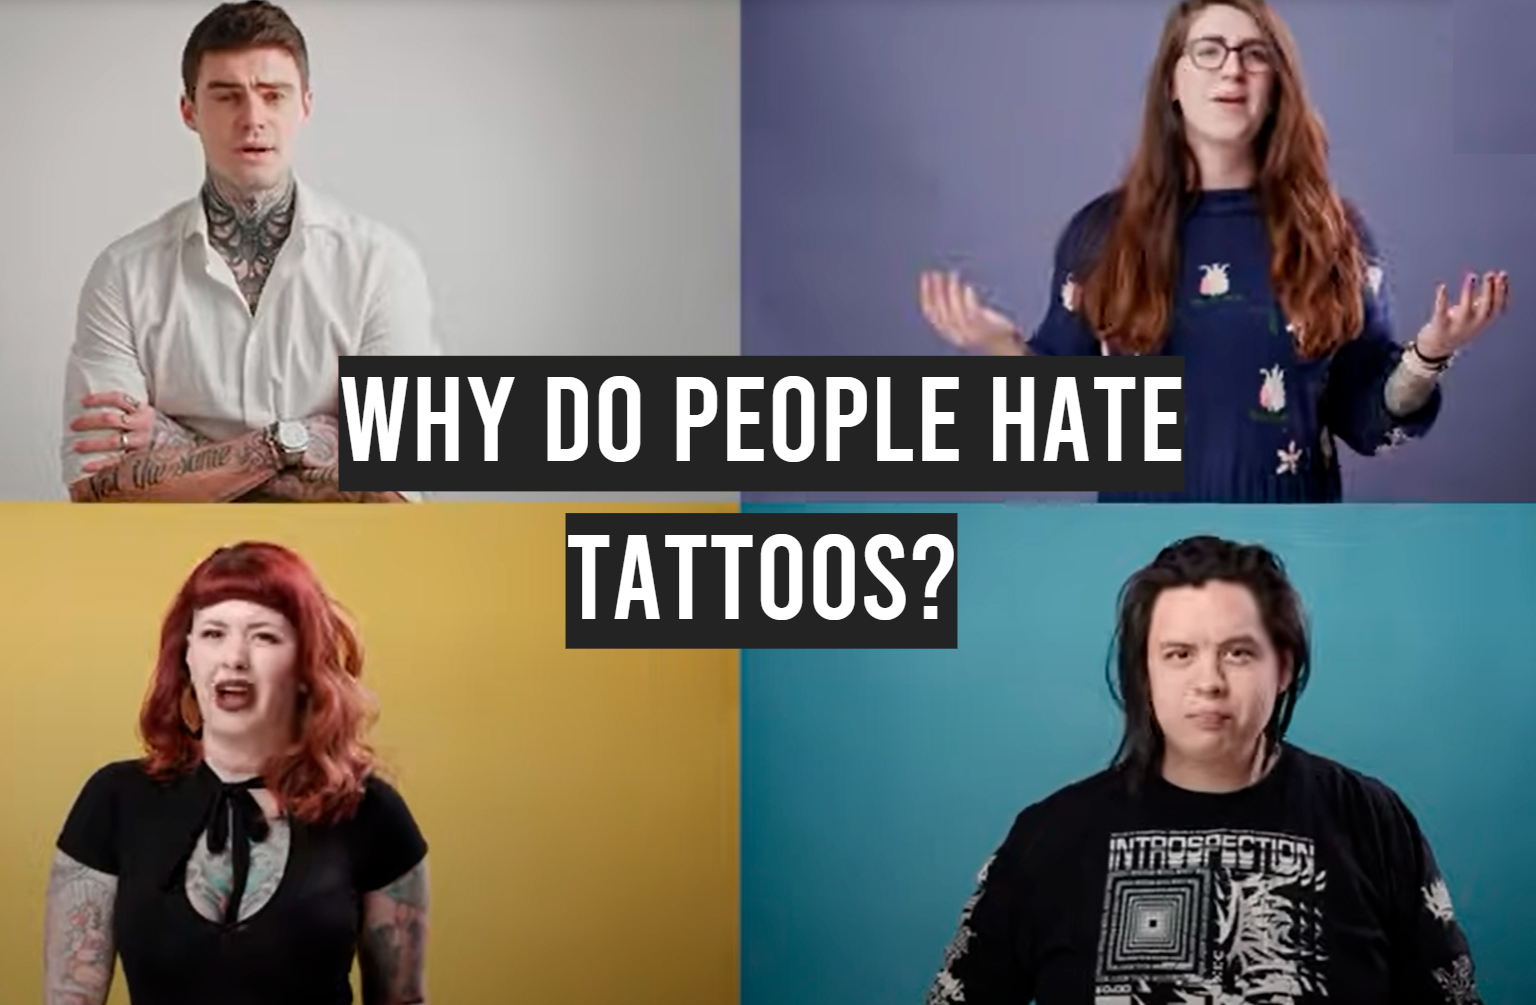 Why Do People Hate Tattoos?